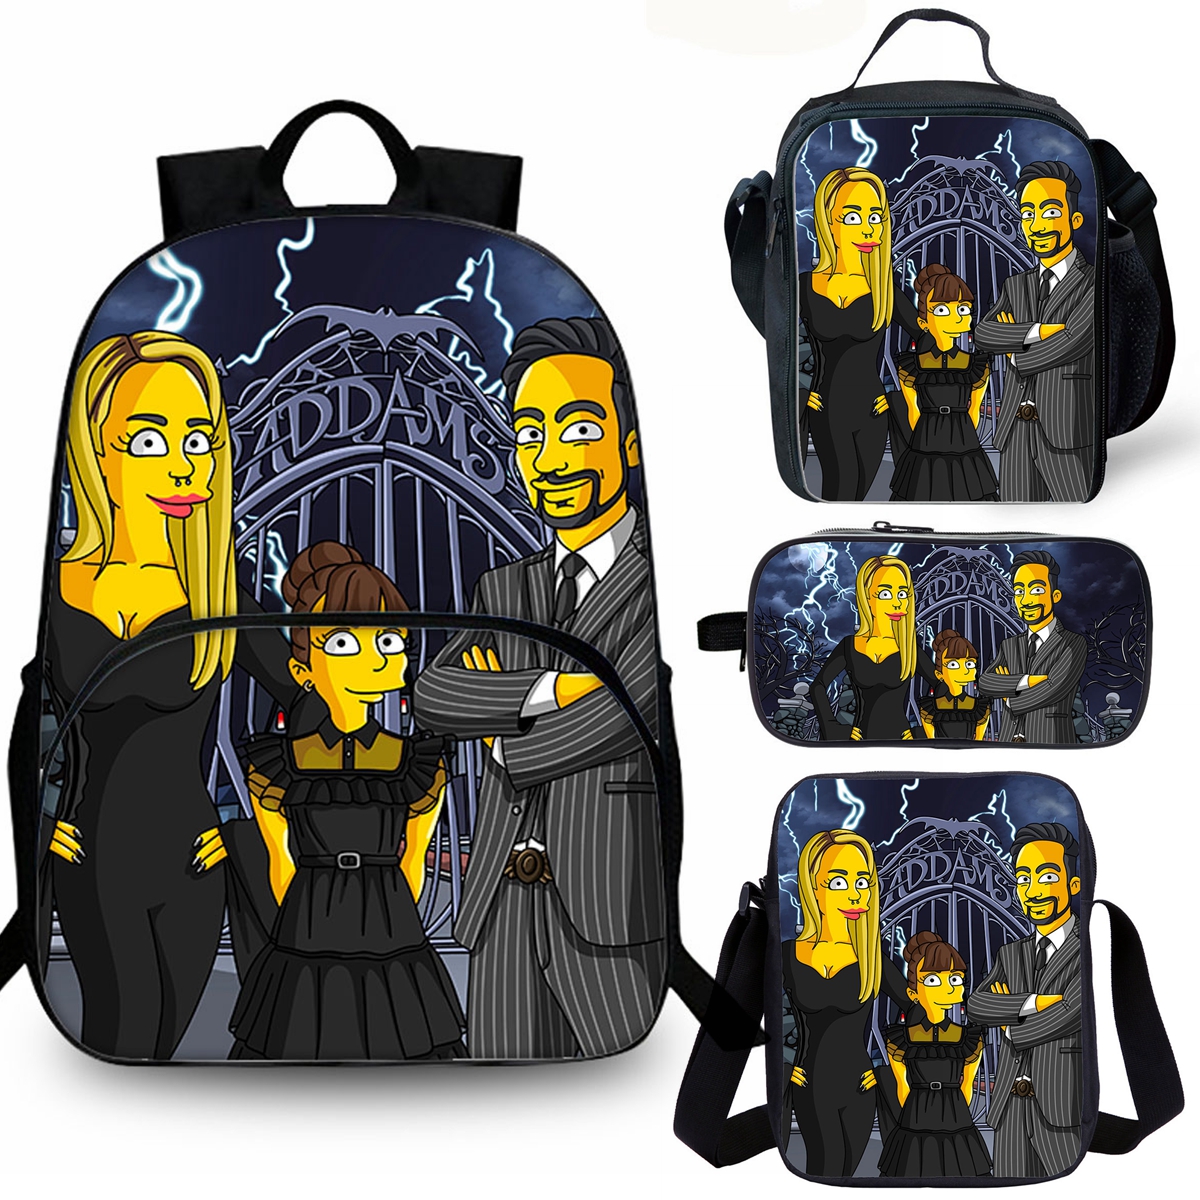 Simpsons Style Addams Family Wednesday Kids School Merch 15" Backpack Insulated Lunch Bag Shoulder Bag Pencil Case